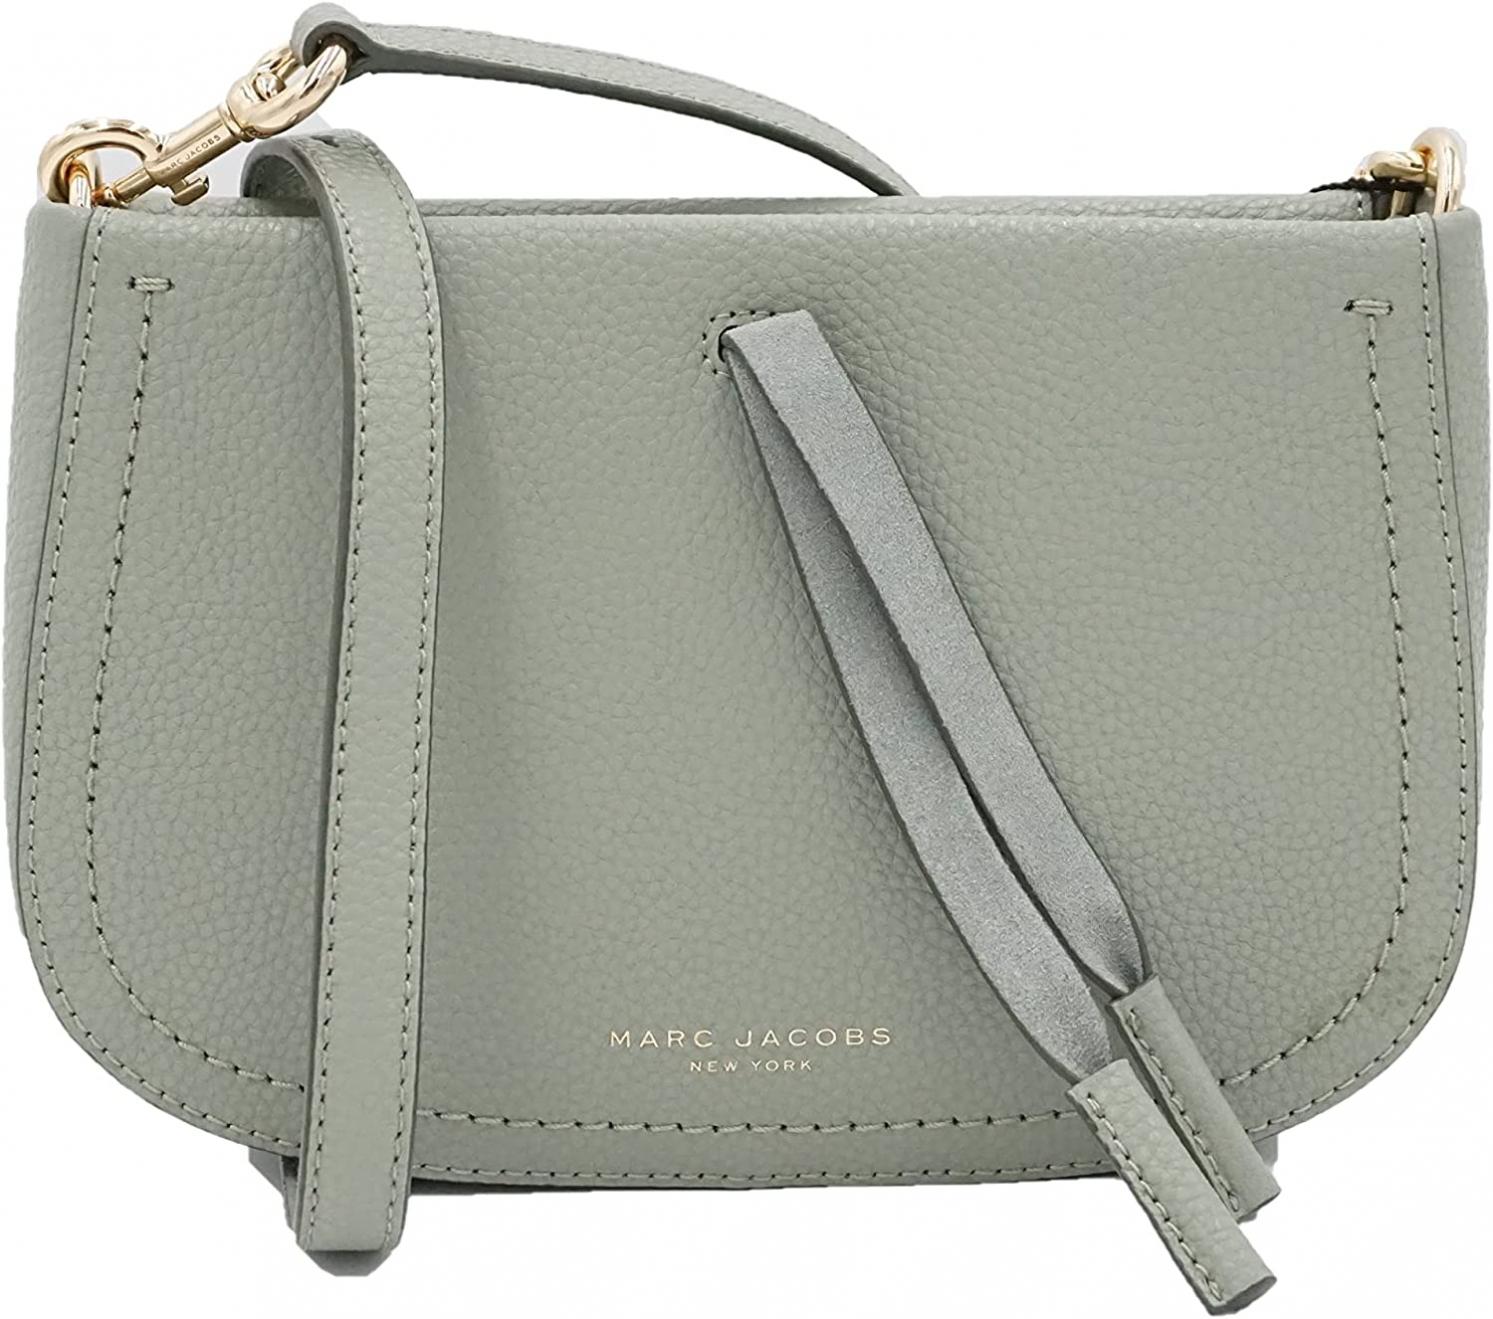 Marc Jacobs H103L01SP21 Seagrass Women's Tasseled Leather Crossbody Bag